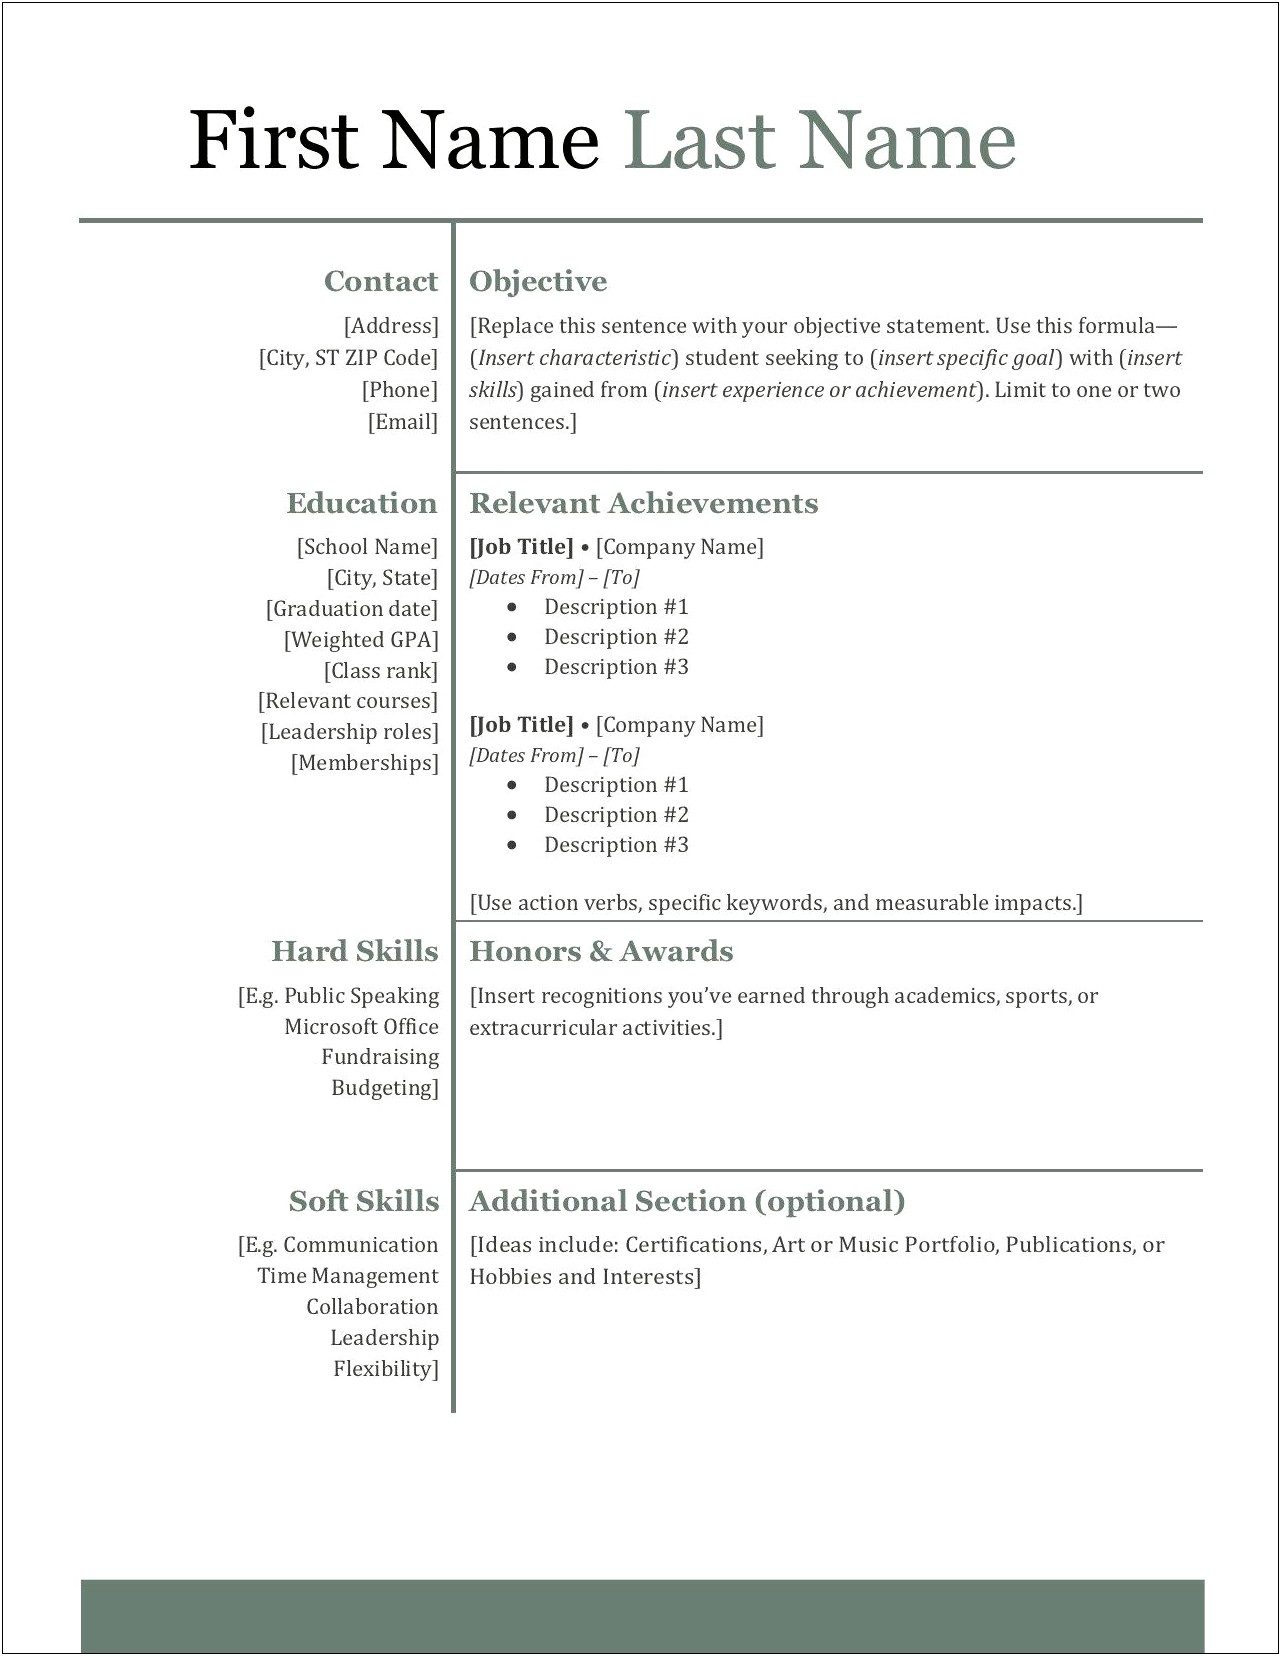 Resume Objective For College Student Seeking Summer Job